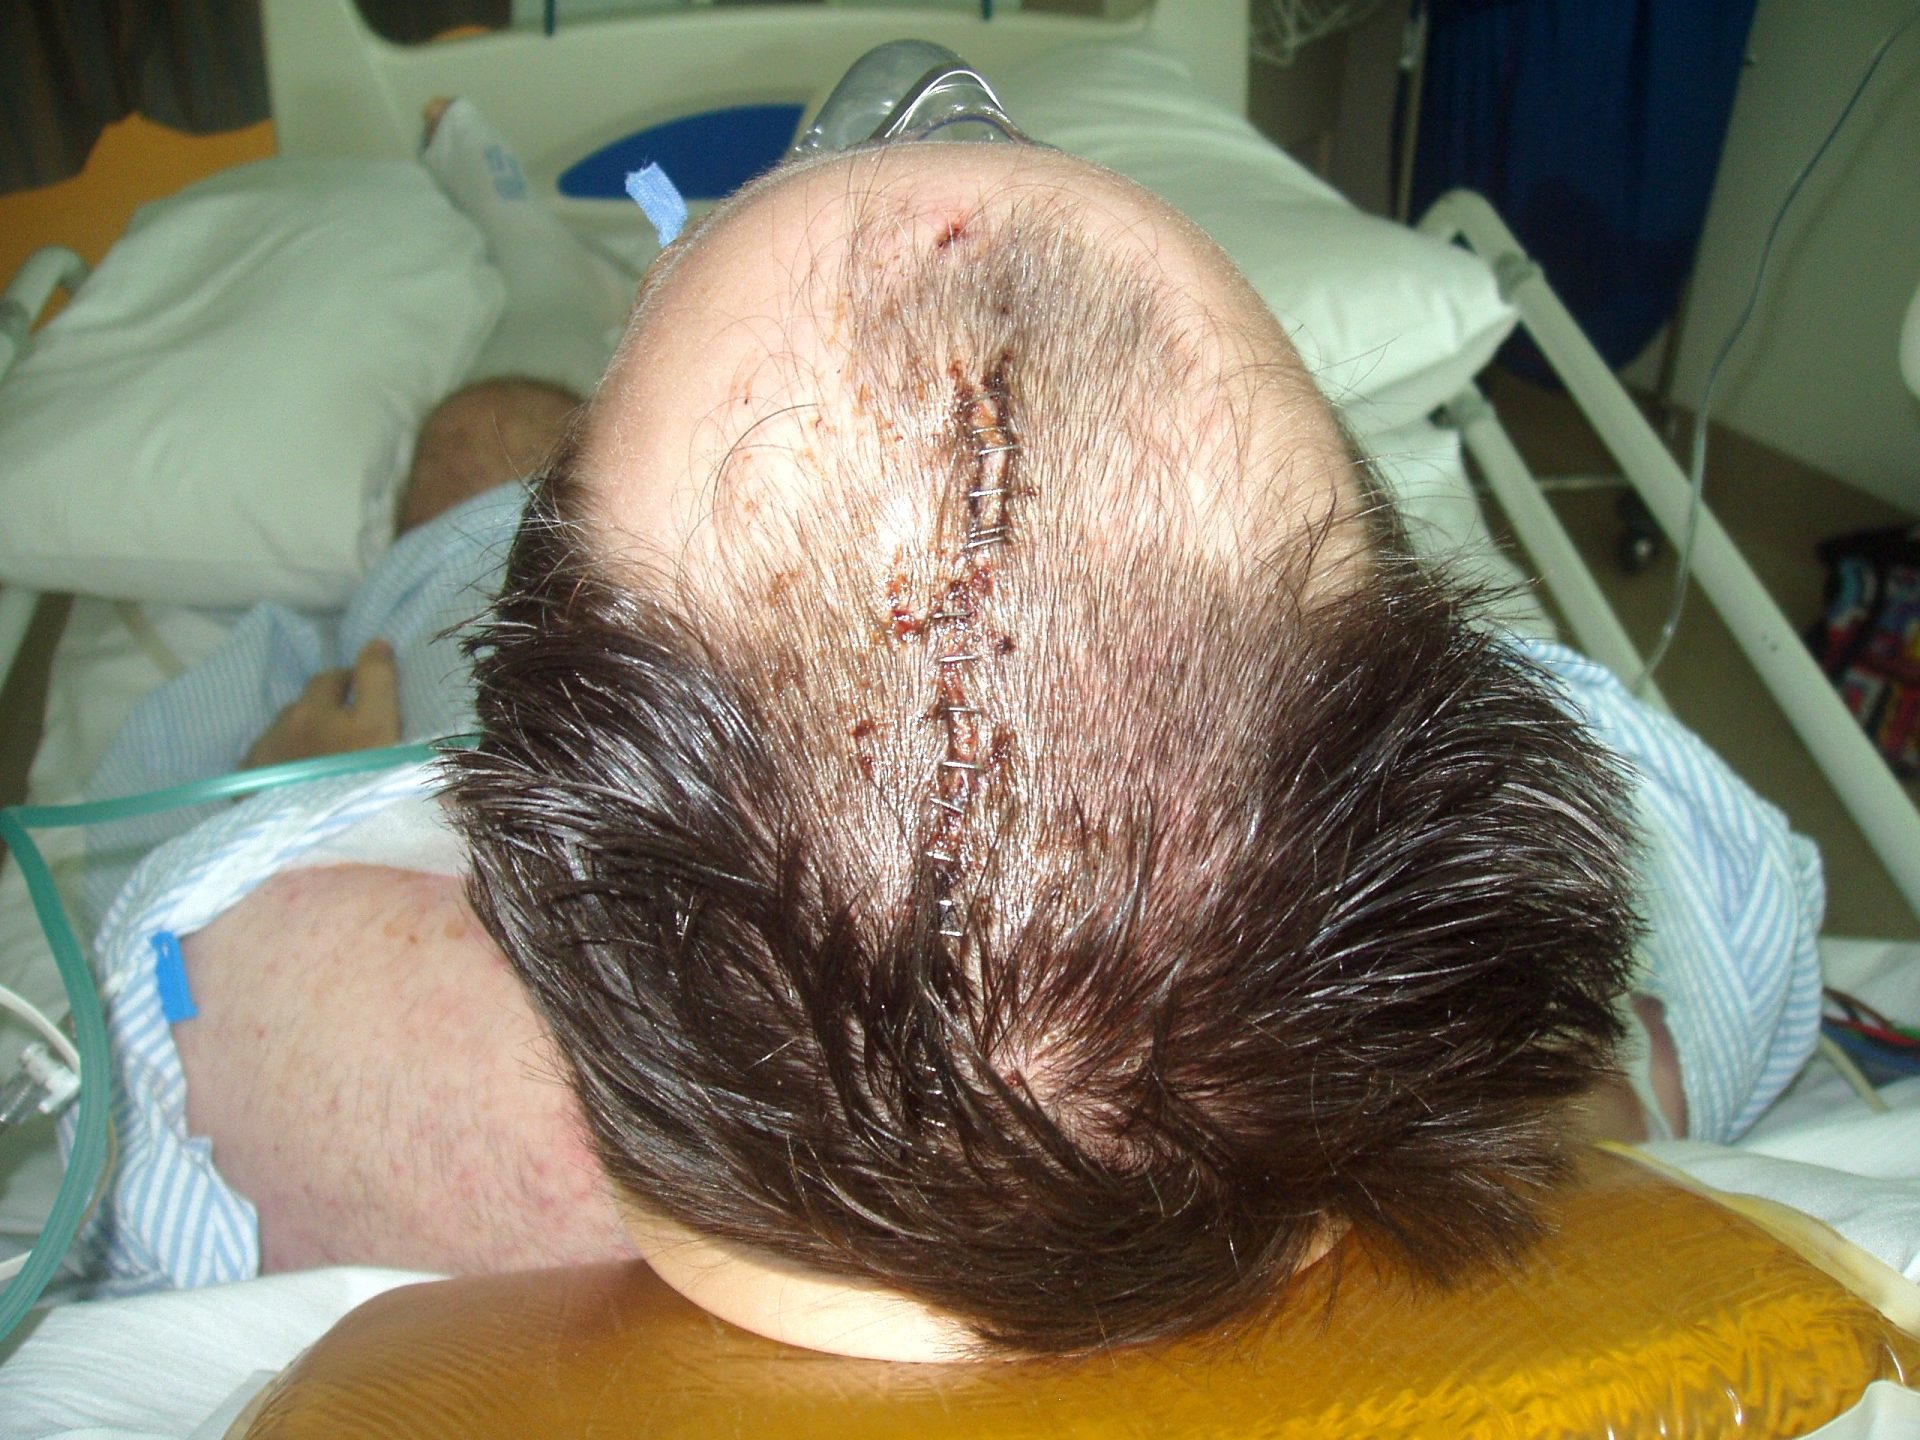 john's shaven head showing the split in his skull and the staples holding it together, no wonder there was a spinal cord injury